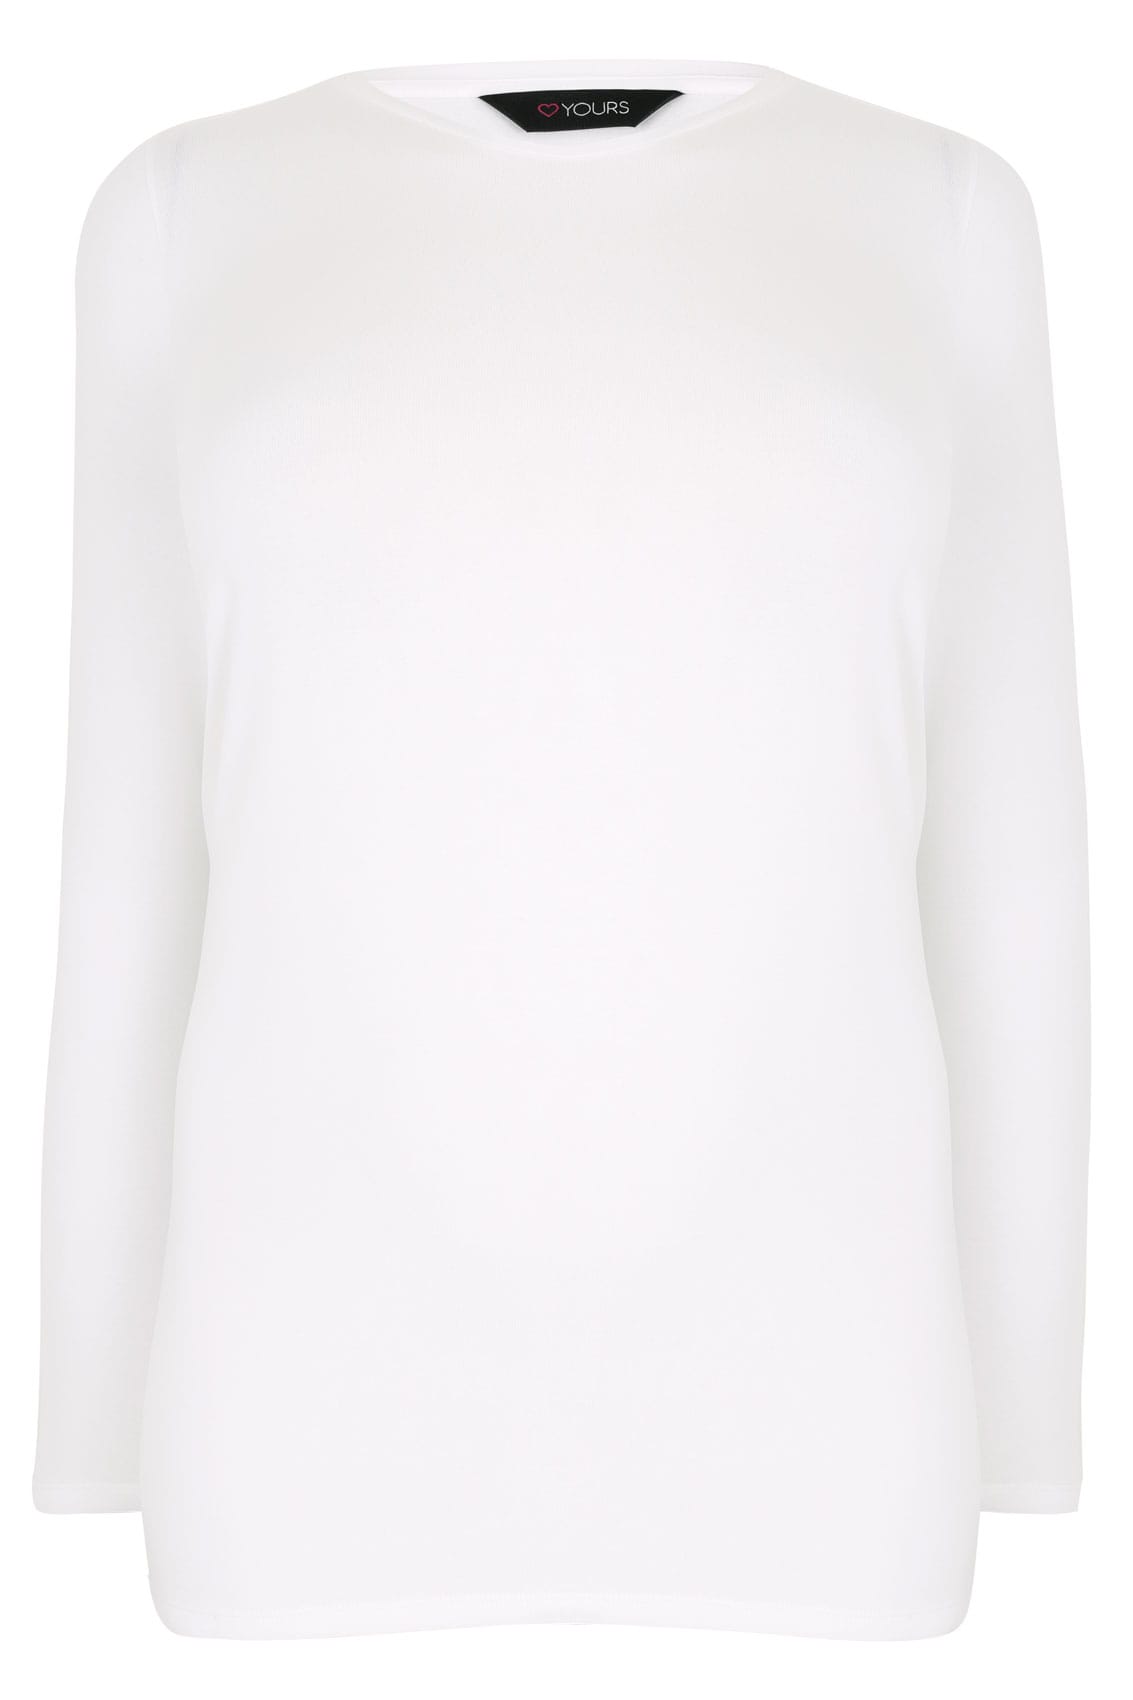 White Long Sleeve Soft Touch Jersey Top, Plus size 16 to 36